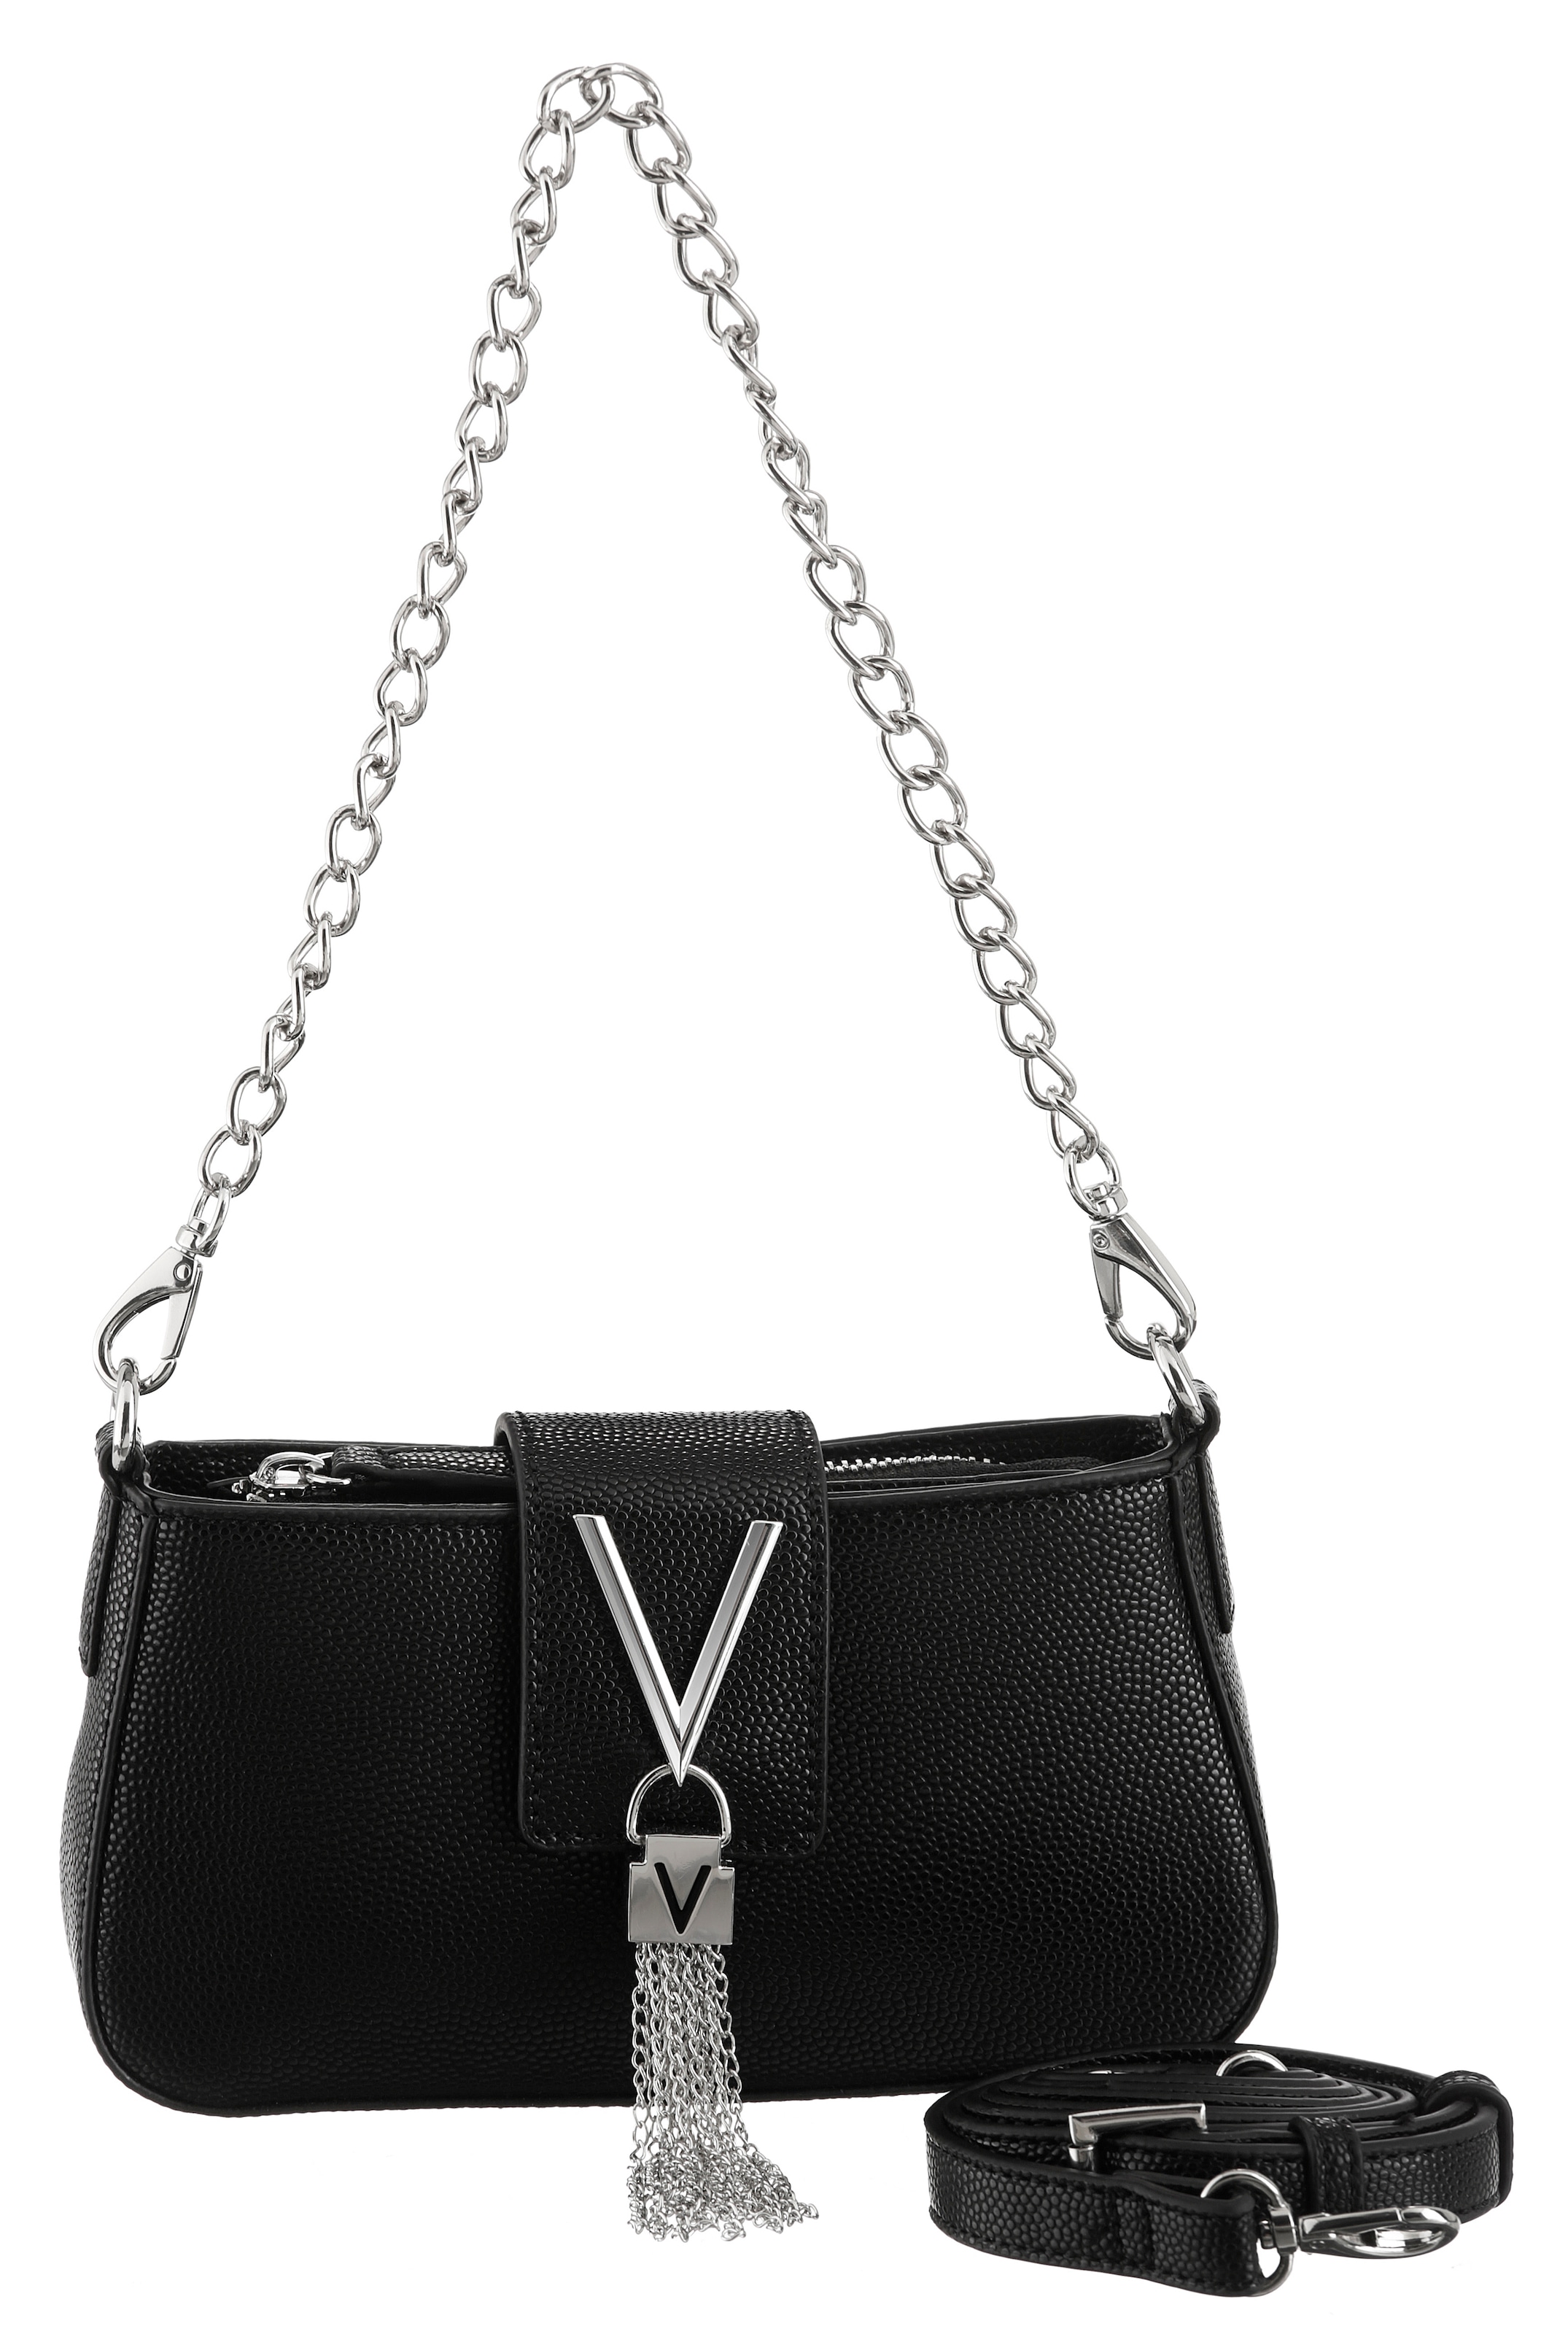 VALENTINO BAGS Schultertasche »DIVINA«, Handtasche Damen Tasche Damen Schultertasche Kettentasche-Valentino Bags 1